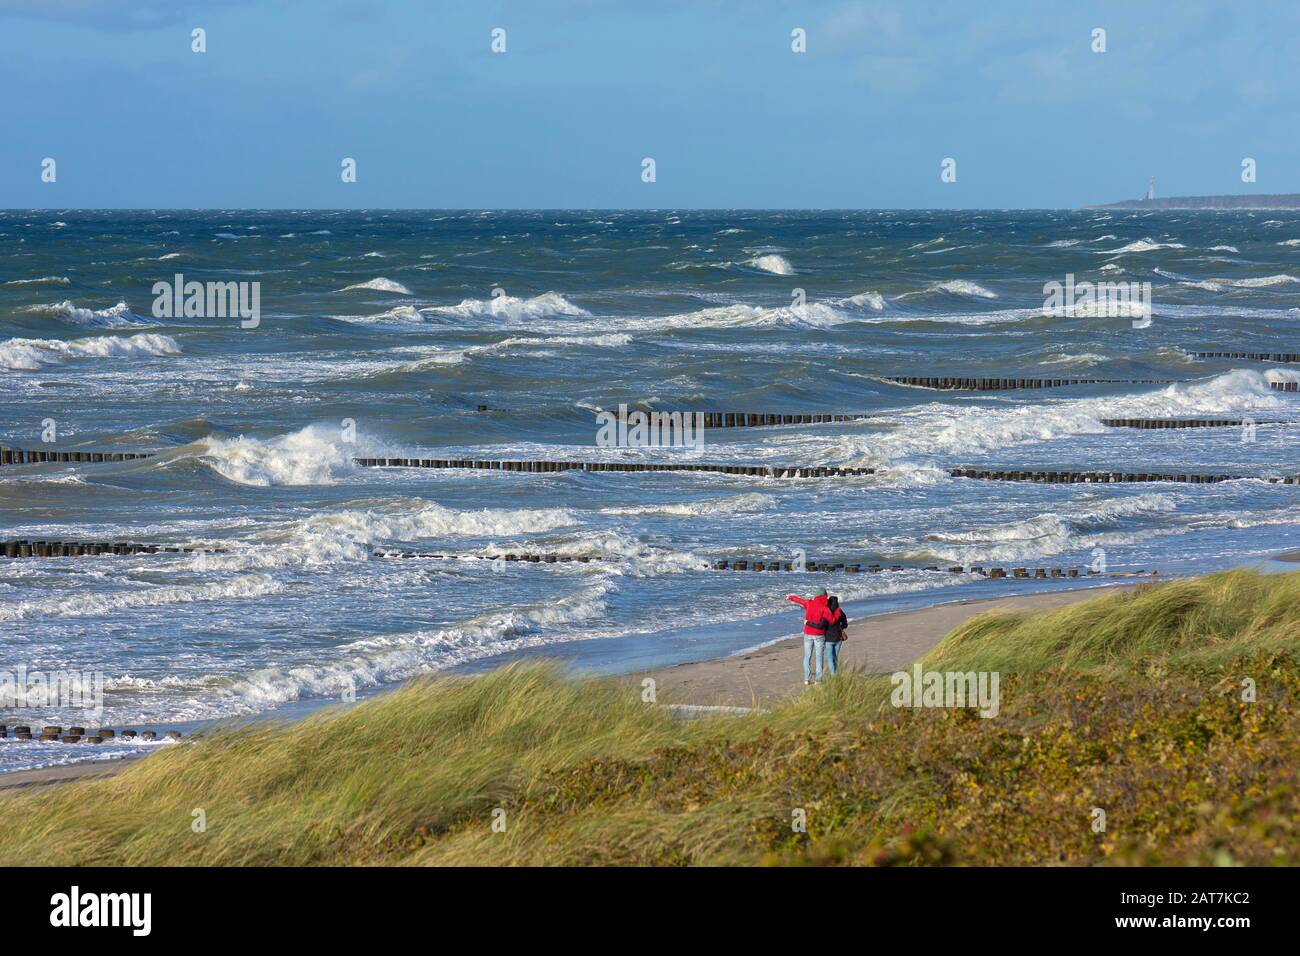 Walker on the beach of the Baltic Sea with waves, stormy weather, Darss, Mecklenburg-Western Pomerania, Germany Stock Photo